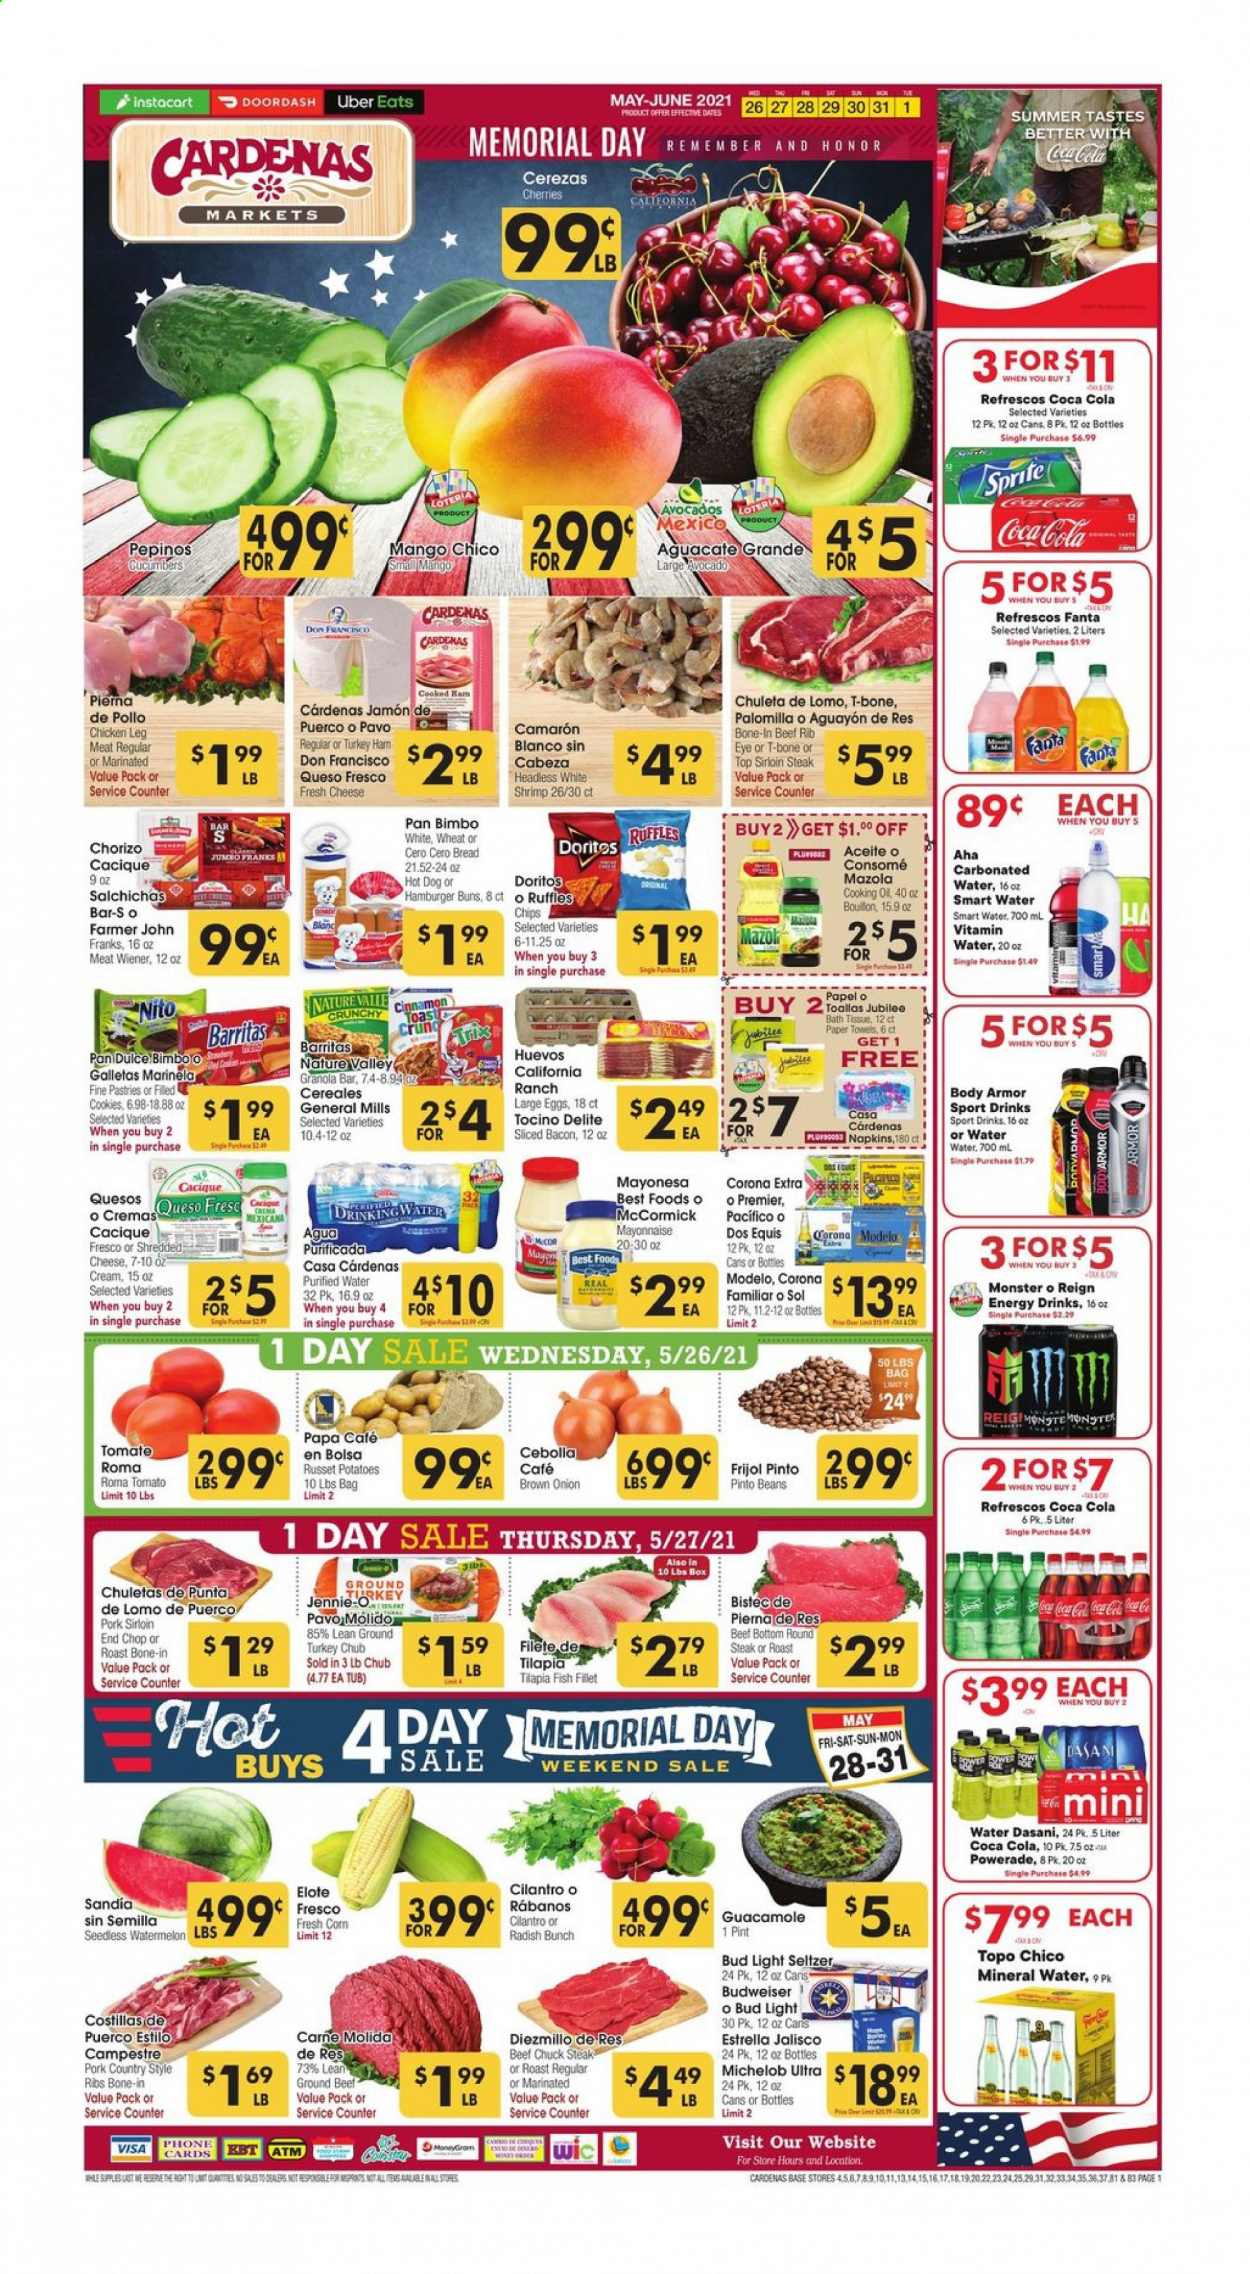 thumbnail - Cardenas Flyer - 05/26/2021 - 06/01/2021 - Sales products - bread, buns, burger buns, beans, corn, cucumber, radishes, russet potatoes, tomatoes, potatoes, mango, watermelon, cherries, fish fillets, tilapia, fish, shrimps, hot dog, bacon, ham, chorizo, guacamole, shredded cheese, queso fresco, large eggs, mayonnaise, cookies, Doritos, chips, Ruffles, bouillon, pinto beans, granola, granola bar, Trix, Nature Valley, cilantro, cinnamon, Coca-Cola, Sprite, Powerade, Fanta, energy drink, Monster, mineral water, purified water, Smartwater, vitamin water, Hard Seltzer, beer, Budweiser, Dos Equis, Michelob, Bud Light, Corona Extra, Sol, Modelo, ground turkey, chicken legs, beef meat, beef sirloin, ground beef, t-bone steak, steak, round steak, sirloin steak, chuck steak, pork loin, pork ribs, country style ribs, napkins, kitchen towels, paper towels, pan. Page 1.